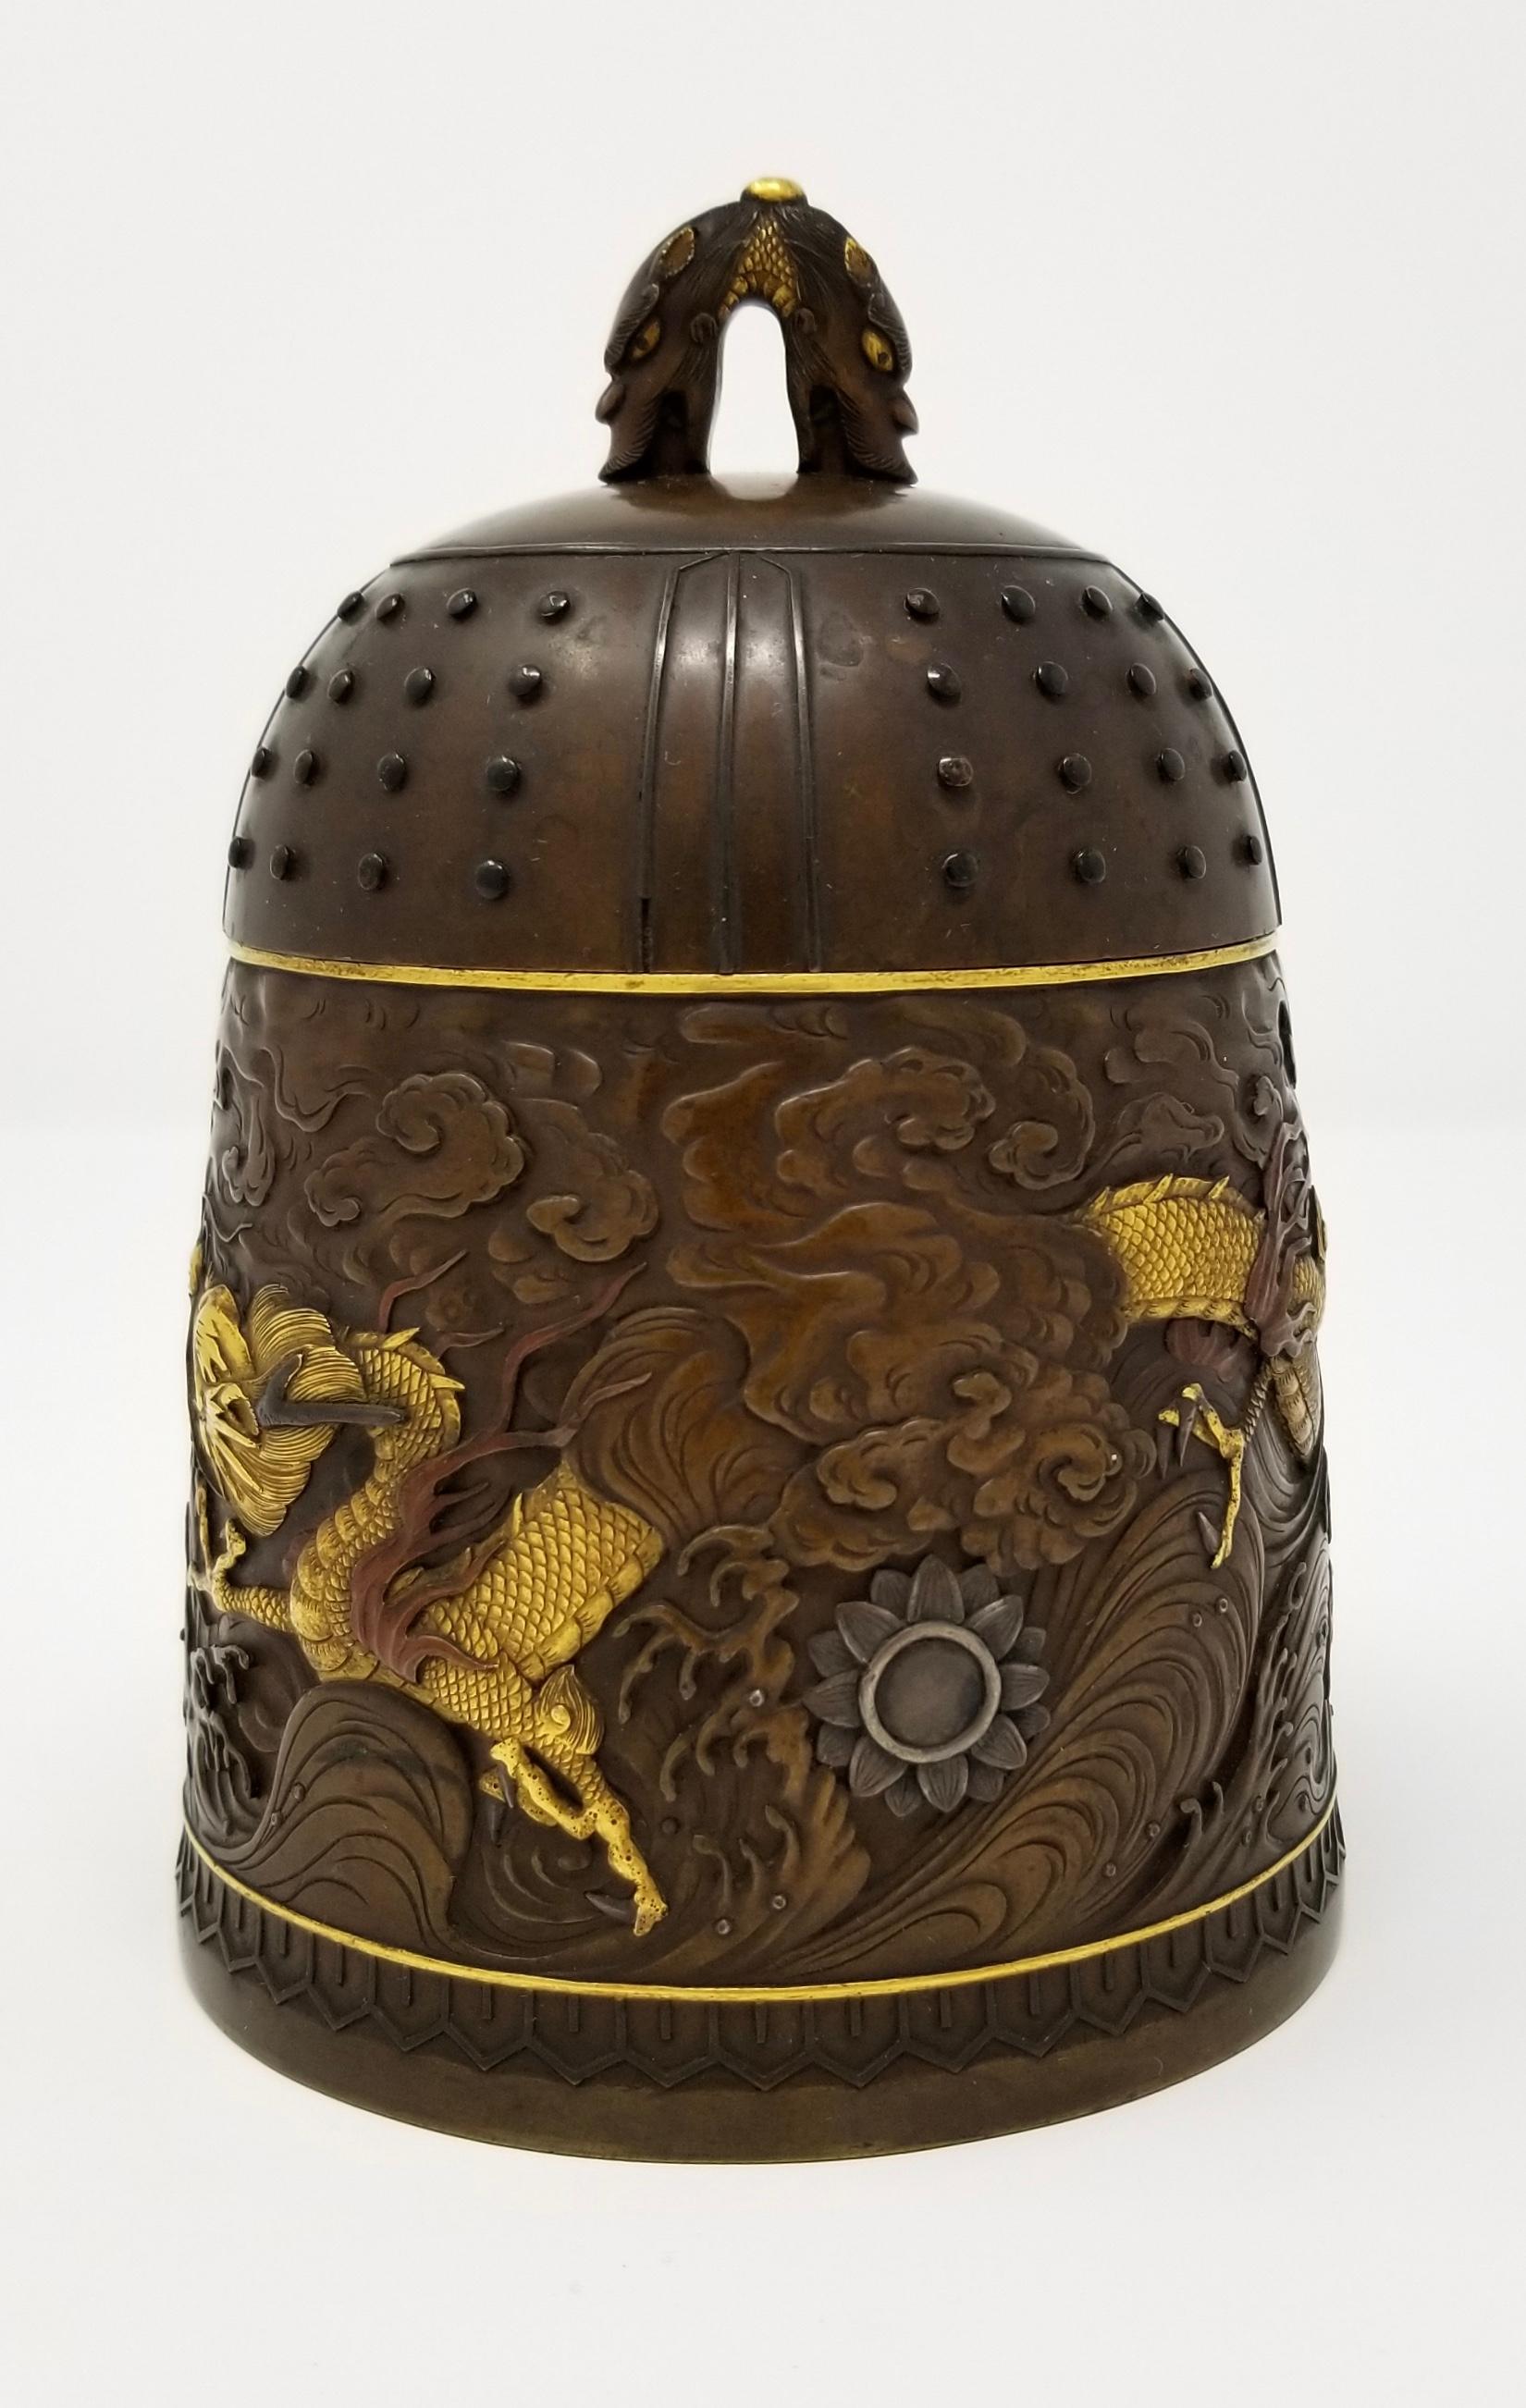 A marvelous Signed Japanese patinated bronze and mixed metal ‘Dragon’ bell-form box & cover from the Hattori Studio, signed, Meiji Period. The mid section of the Bell-Form box is meticulously decorated with a golden dragon flying throughout clouds